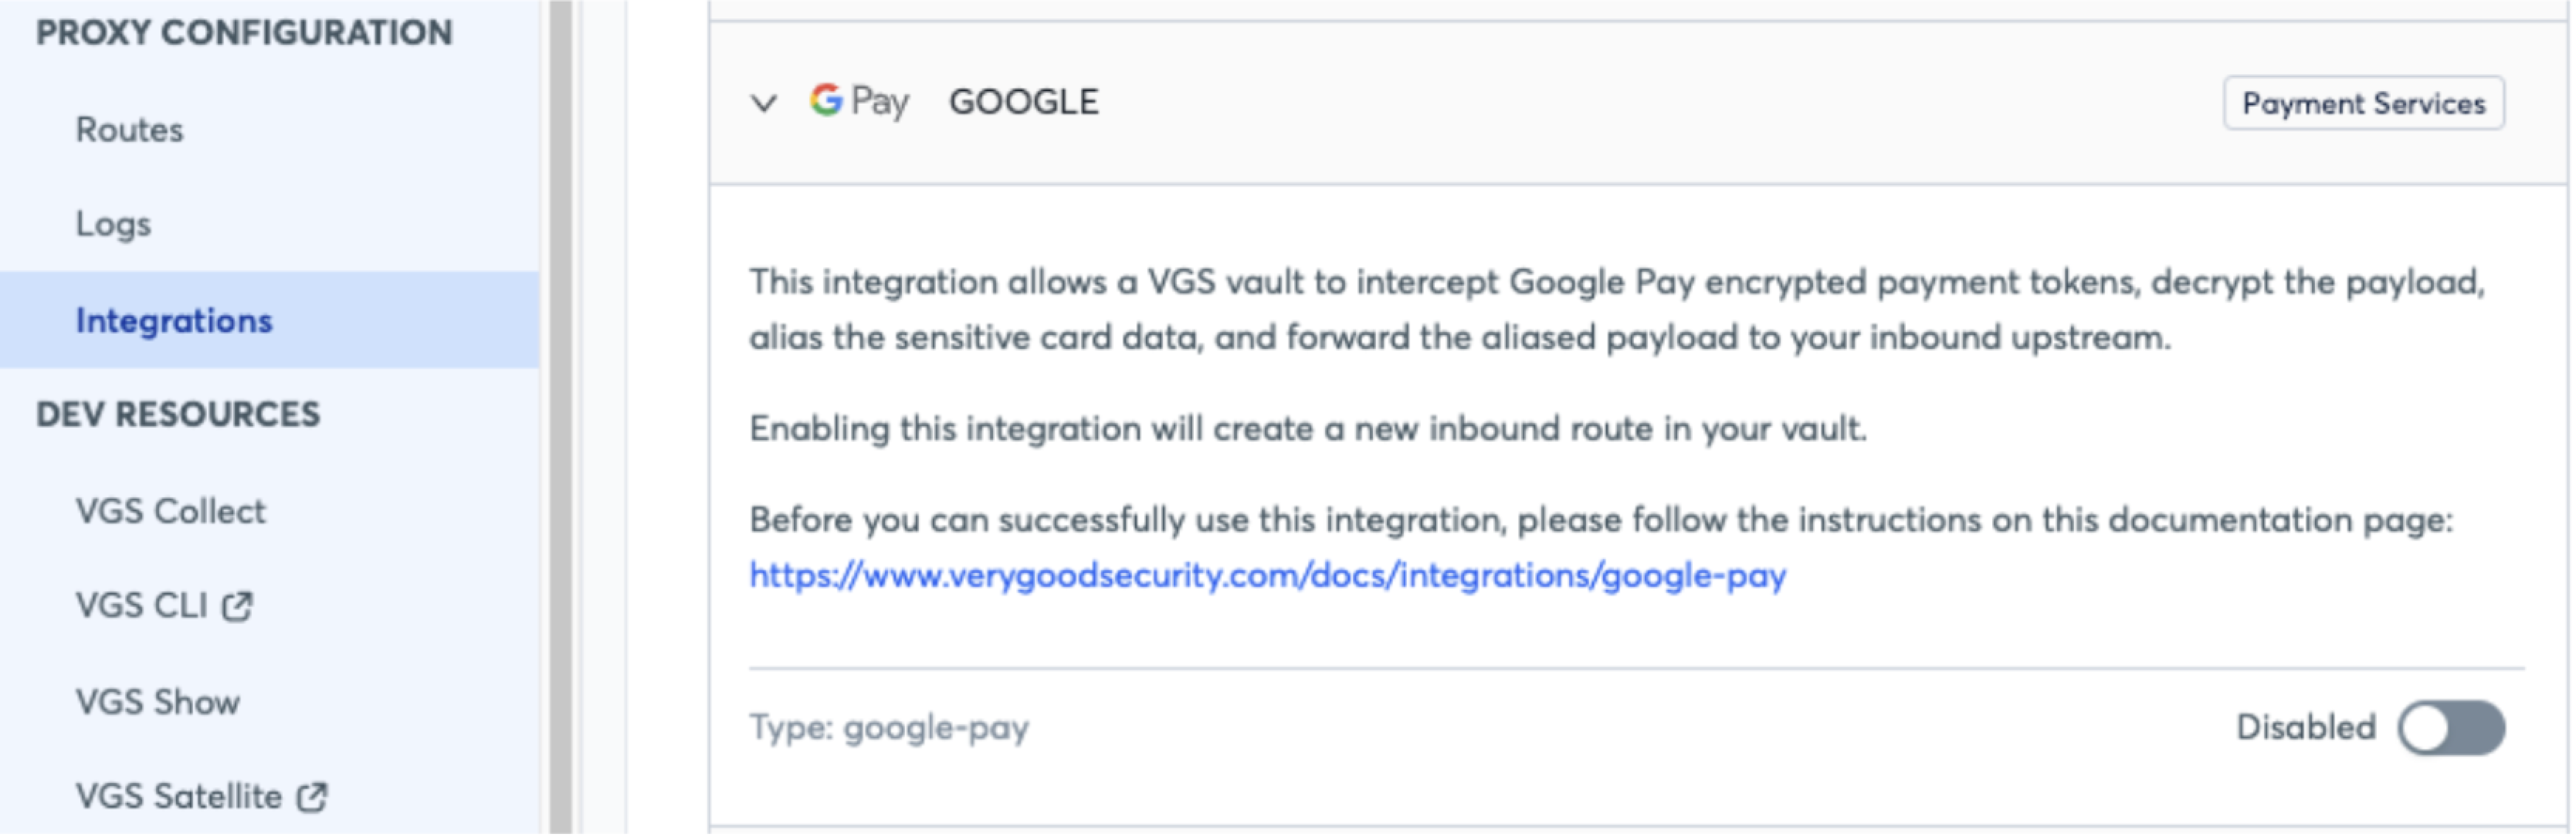 How To Integrate Google Pay with VGS.